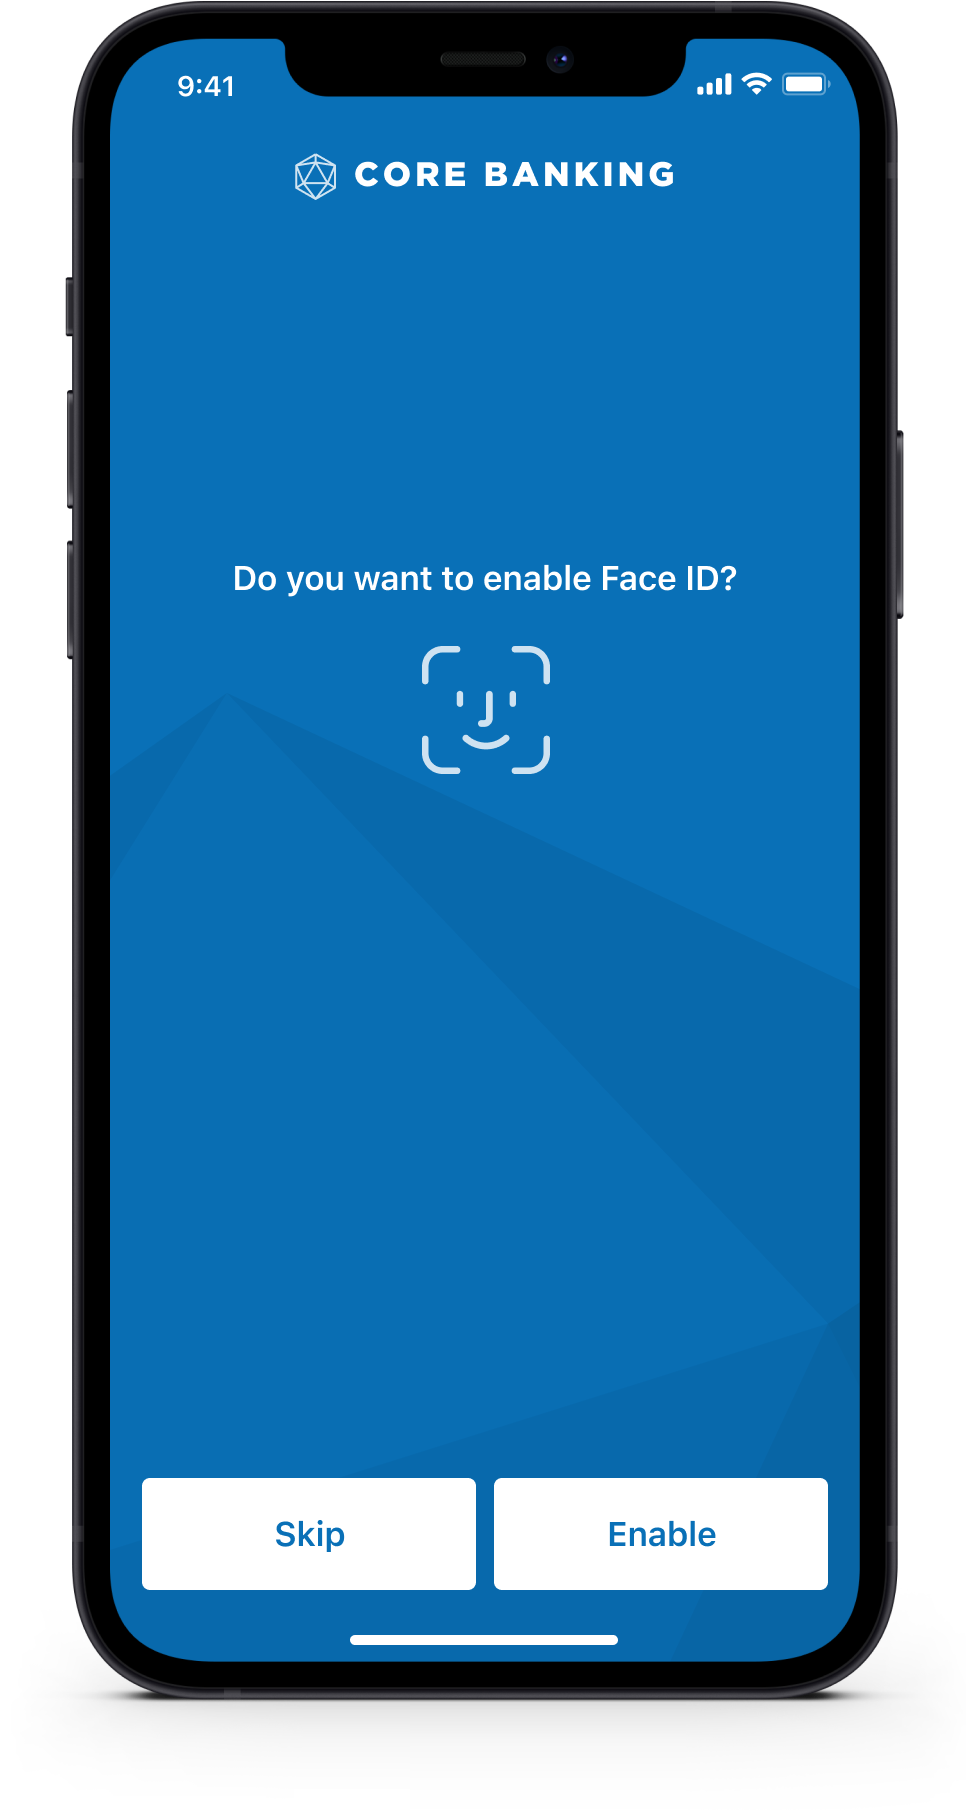 mobile-banking-app-face-id